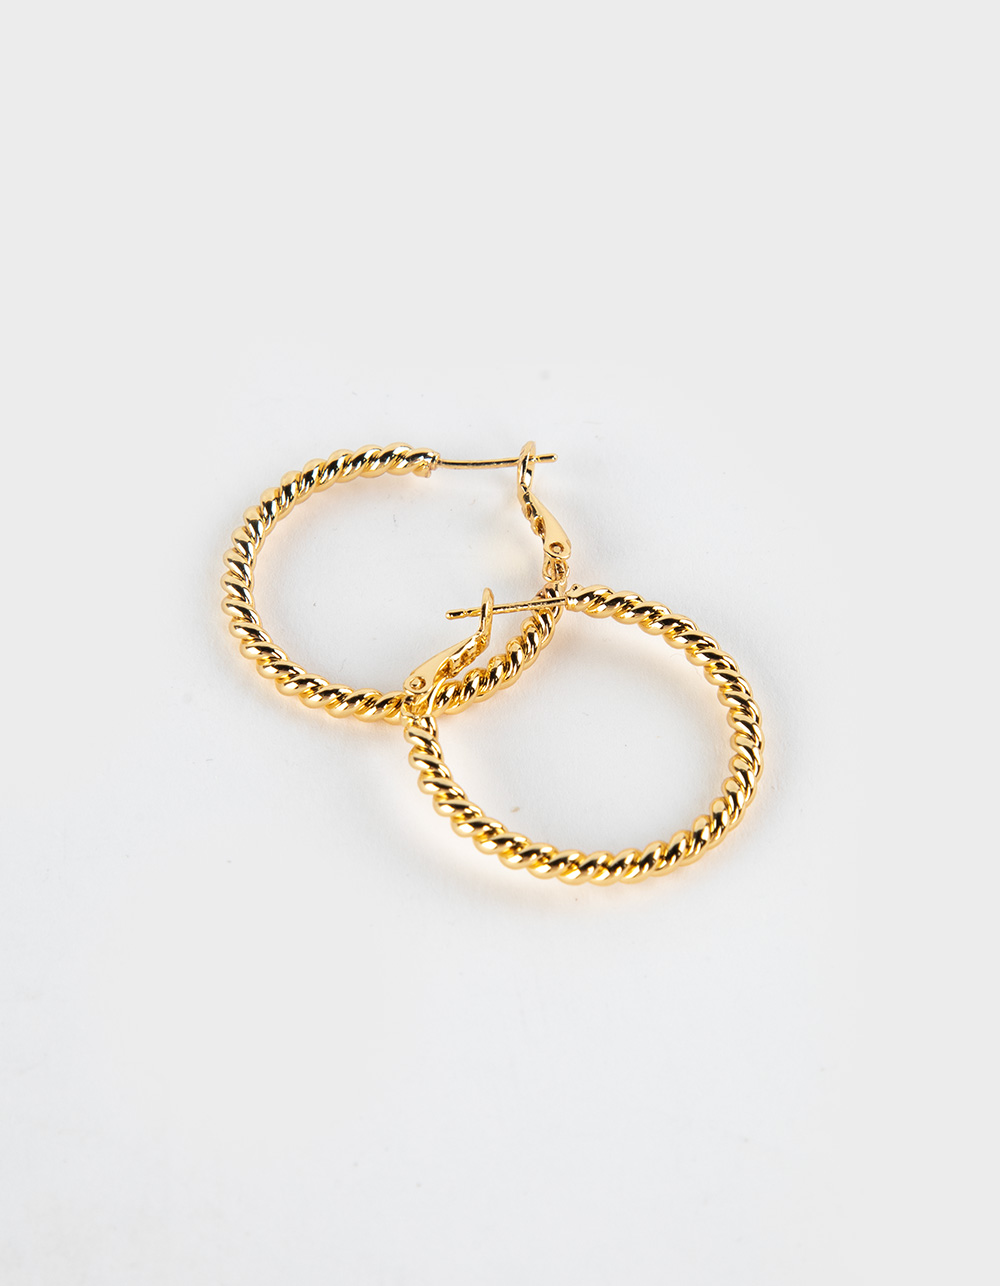 DO EVERYTHING IN LOVE 14K Gold Dipped Omega Closure Textured Hoop Earrings